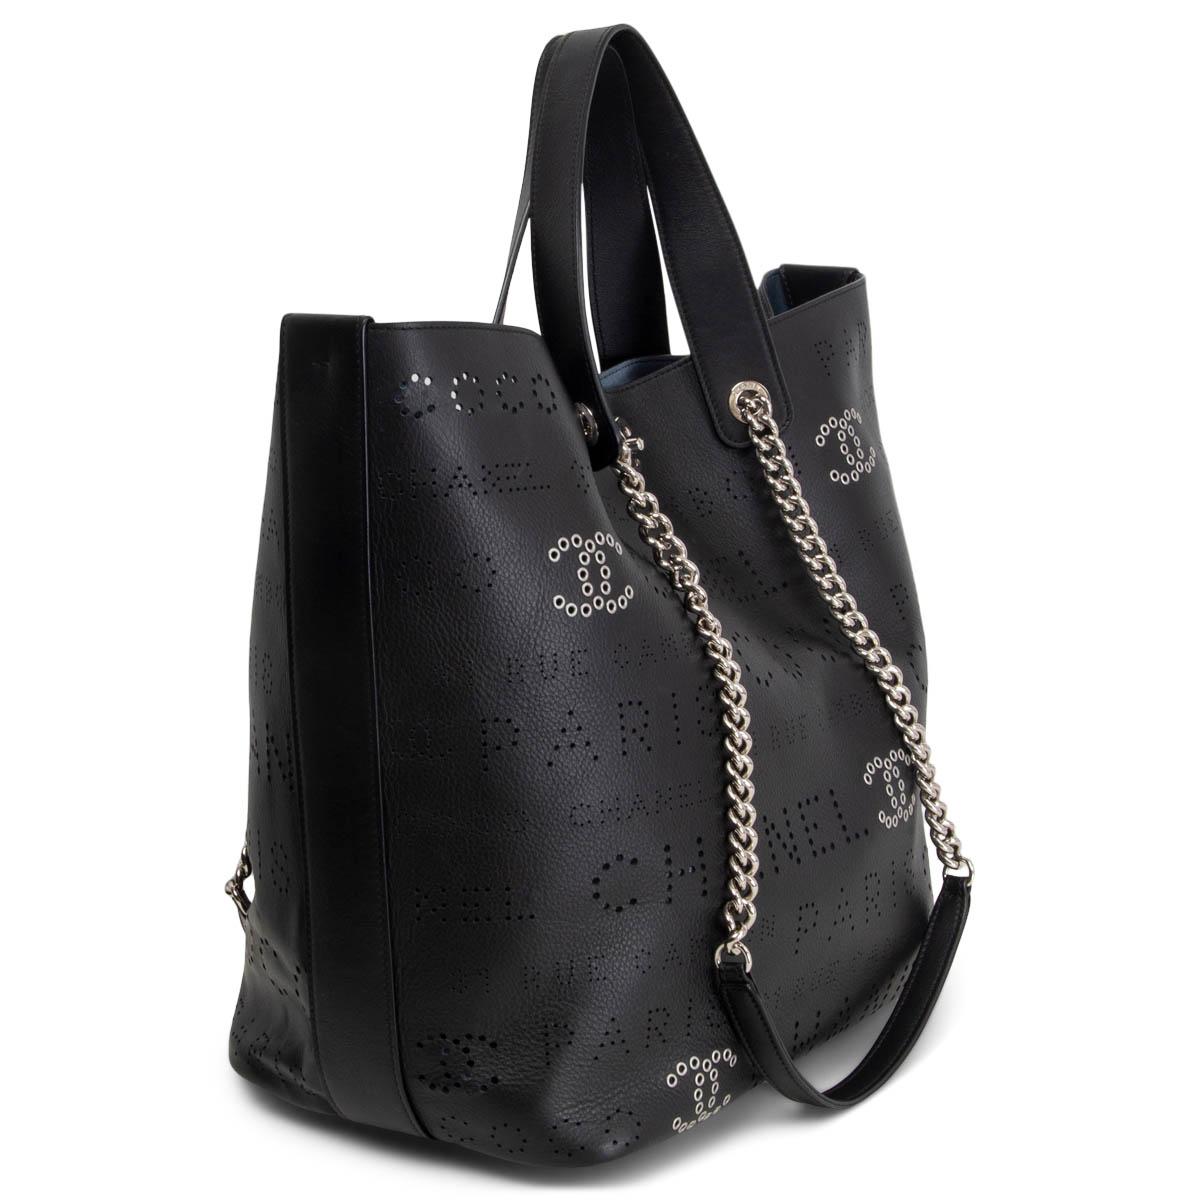 100% authentic Chanel 2019 Perforated Logo Eyelet Small Shopping Bag in black smooth calfskin embellished with CC silver-tone eyelet detailing and chain straps. Opens with a silver-tone CC turn-lock to a pale blue unlined interior with a blue, with